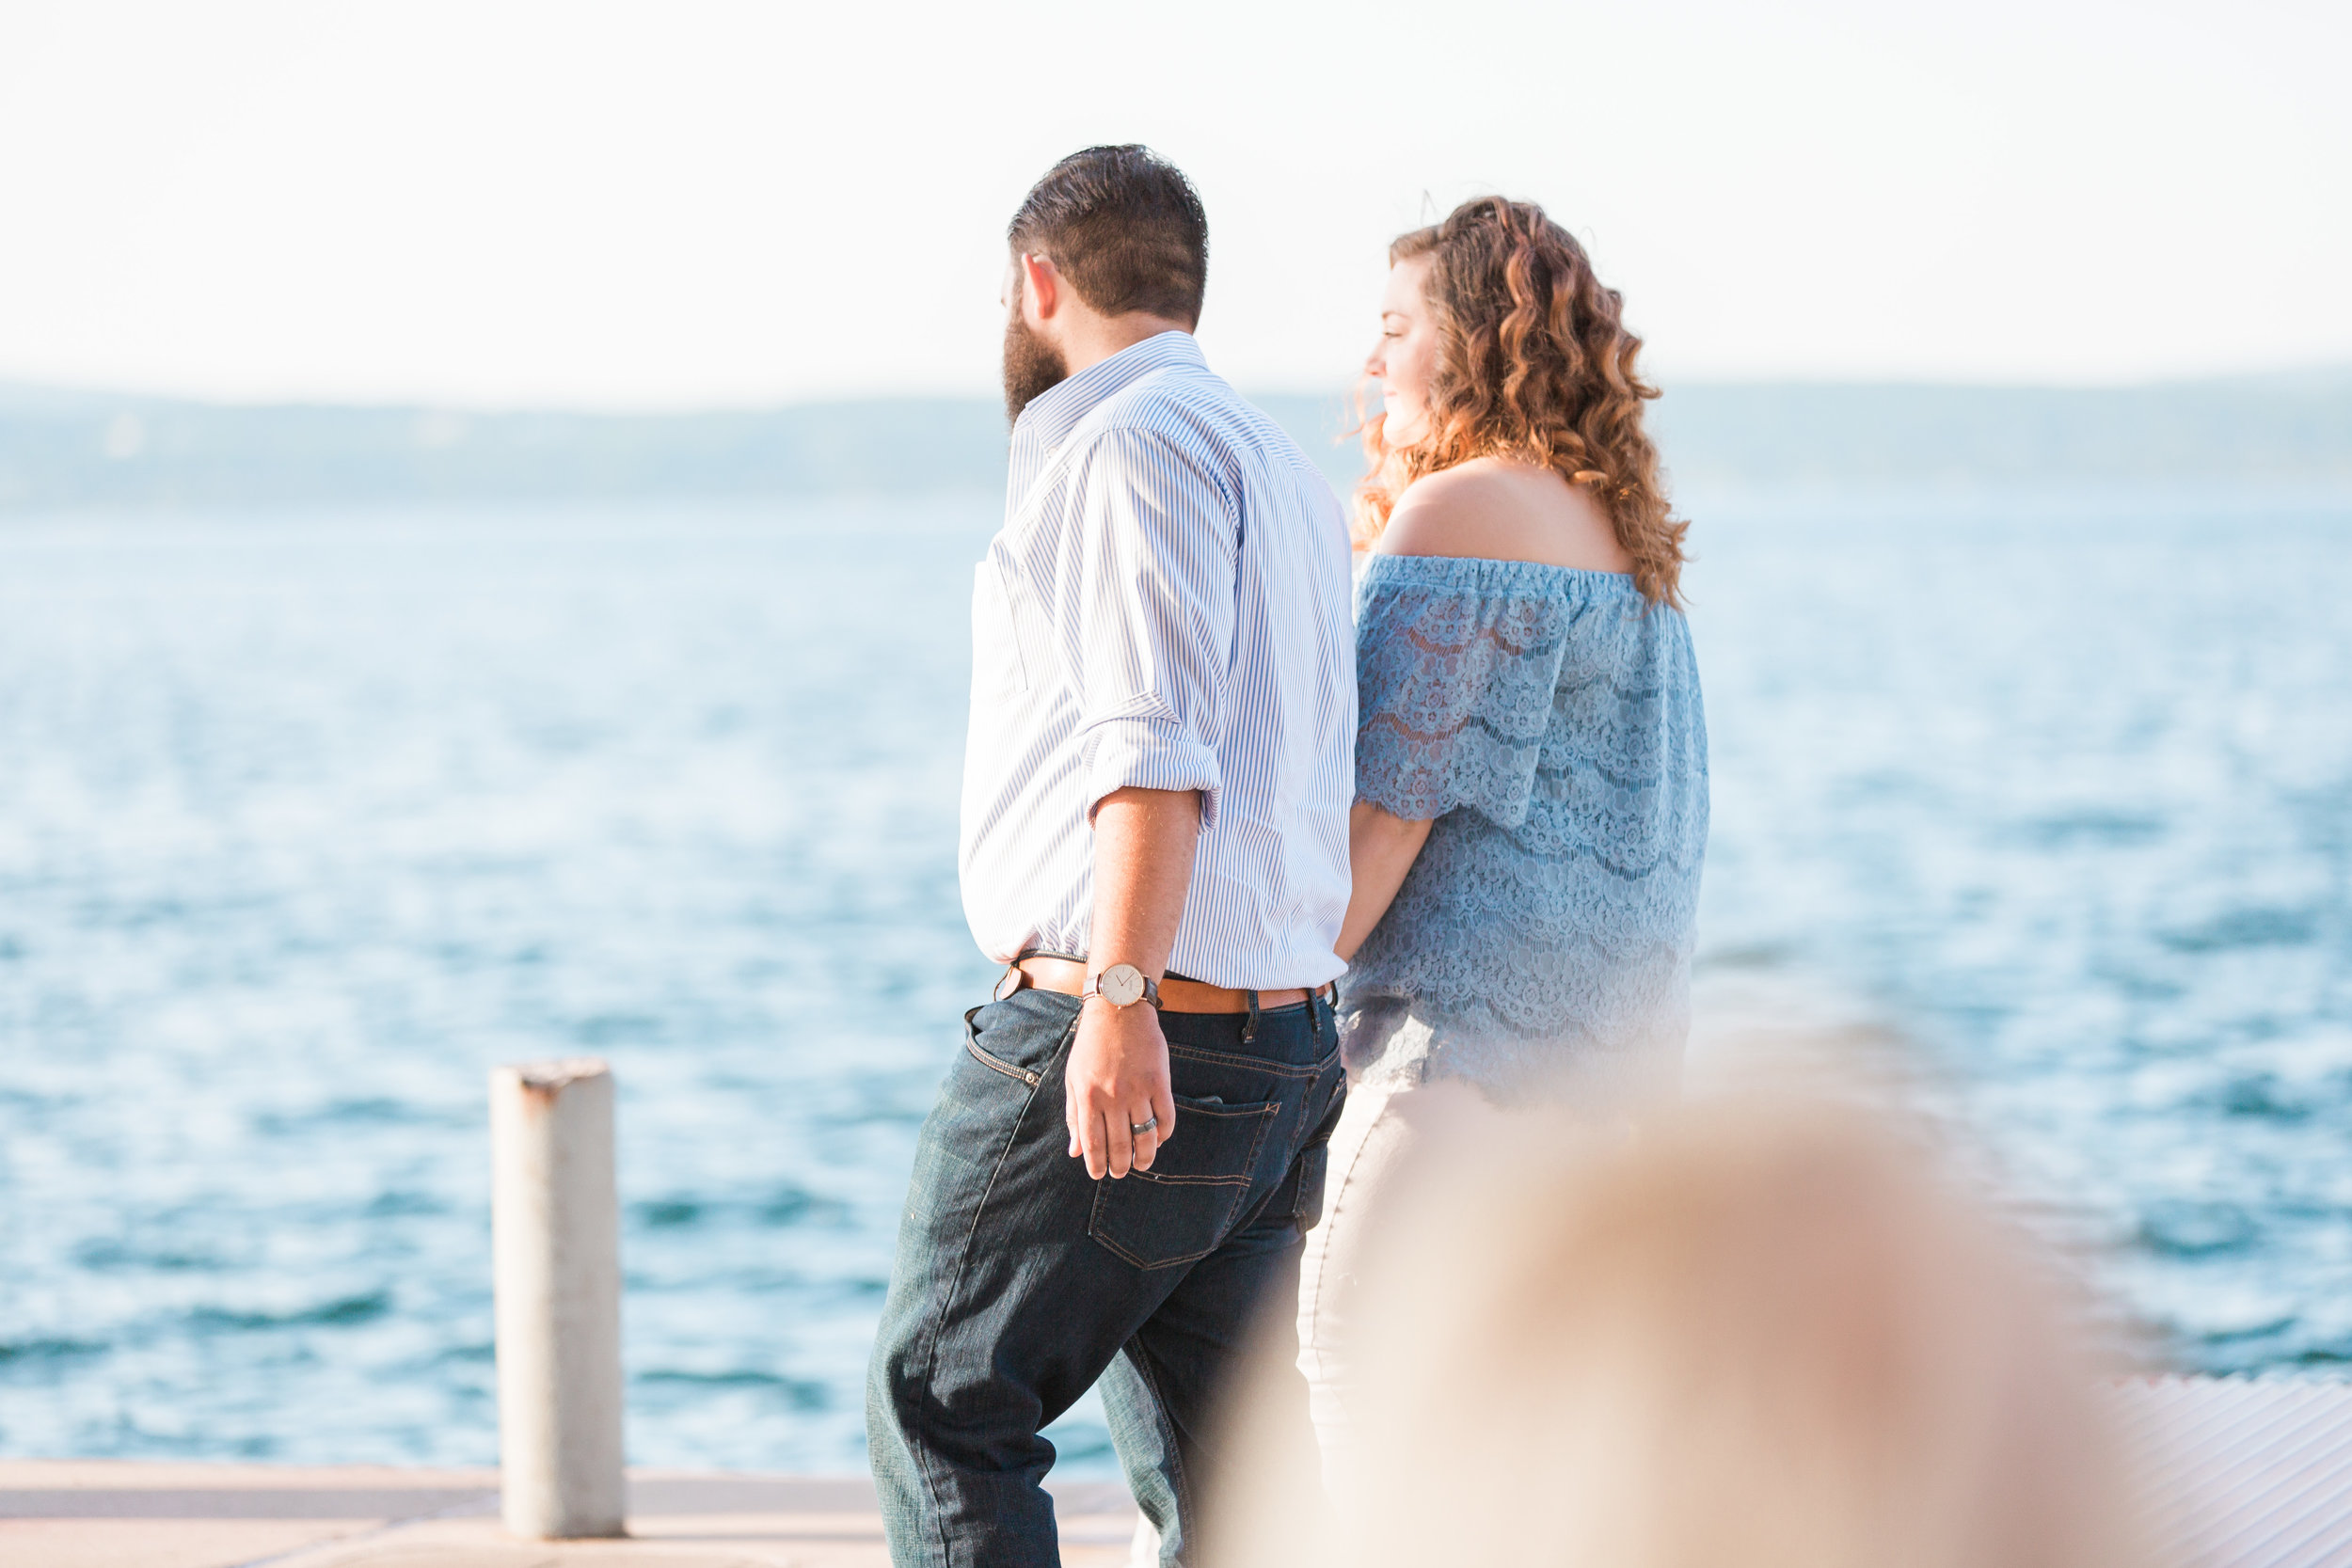 Romantic Petoskey Michigan Proposal on the Pier | How He Asked | She Said Yes | Laurenda Marie Photography